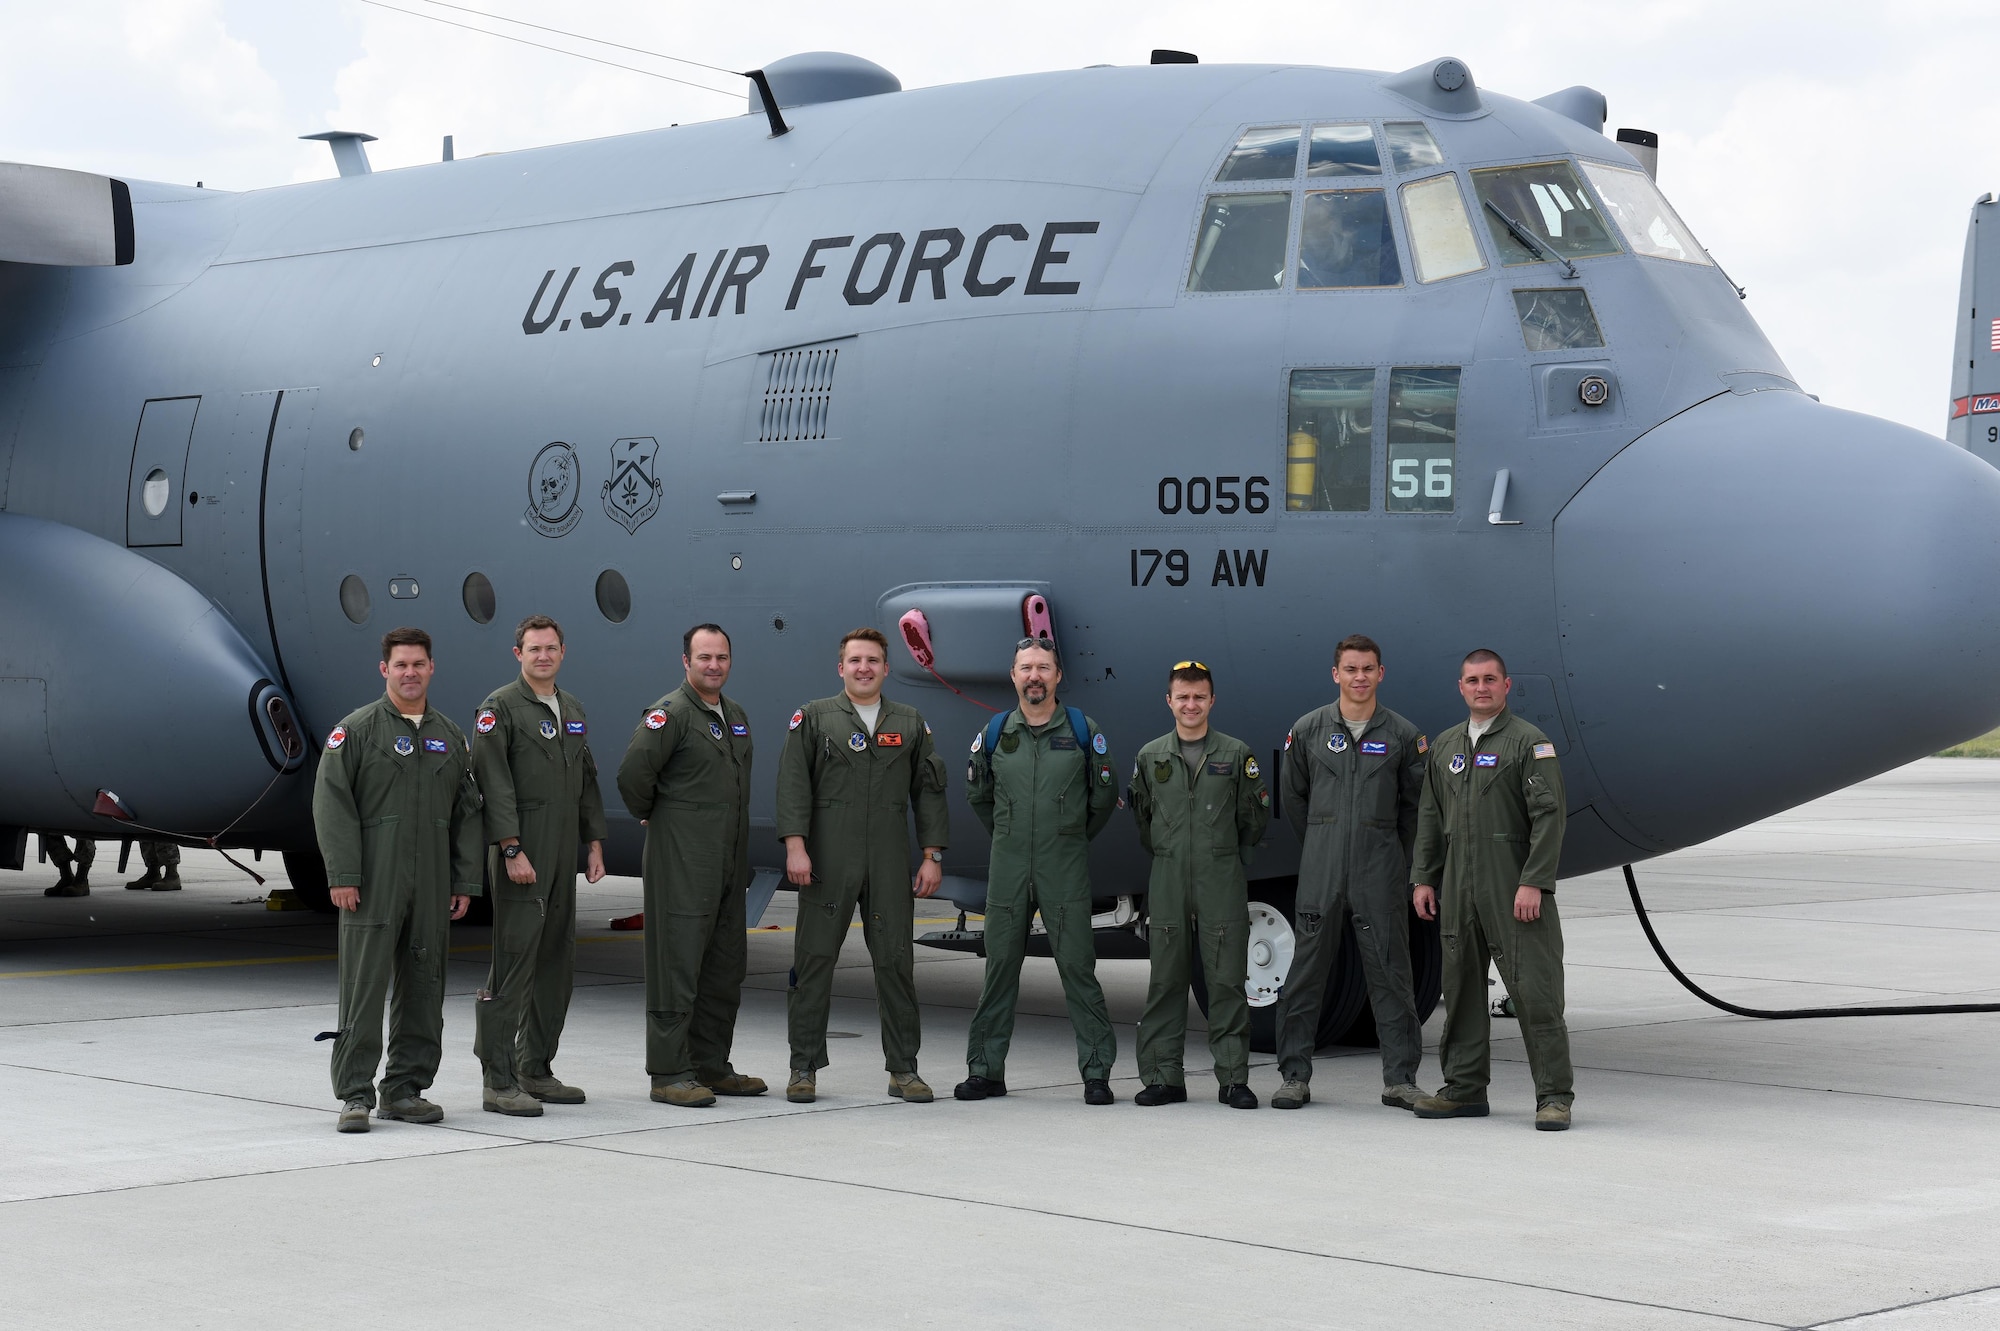 Aircrew members assigned to the Ohio Air National Guard’s 179th Airlift Wing stand with two Hungarian Air Force Pilots after an orientation flight on a C-130 Hercules during Exercise Load Diffuser, in Kecskemet, Hungary, on June 6. The Ohio National Guard has a two-decade long partnership with Hungary through the National Guard’s State Partnership Program, and orientation flights are another way to build relationships and enhance training with our allied nation, Hungary.